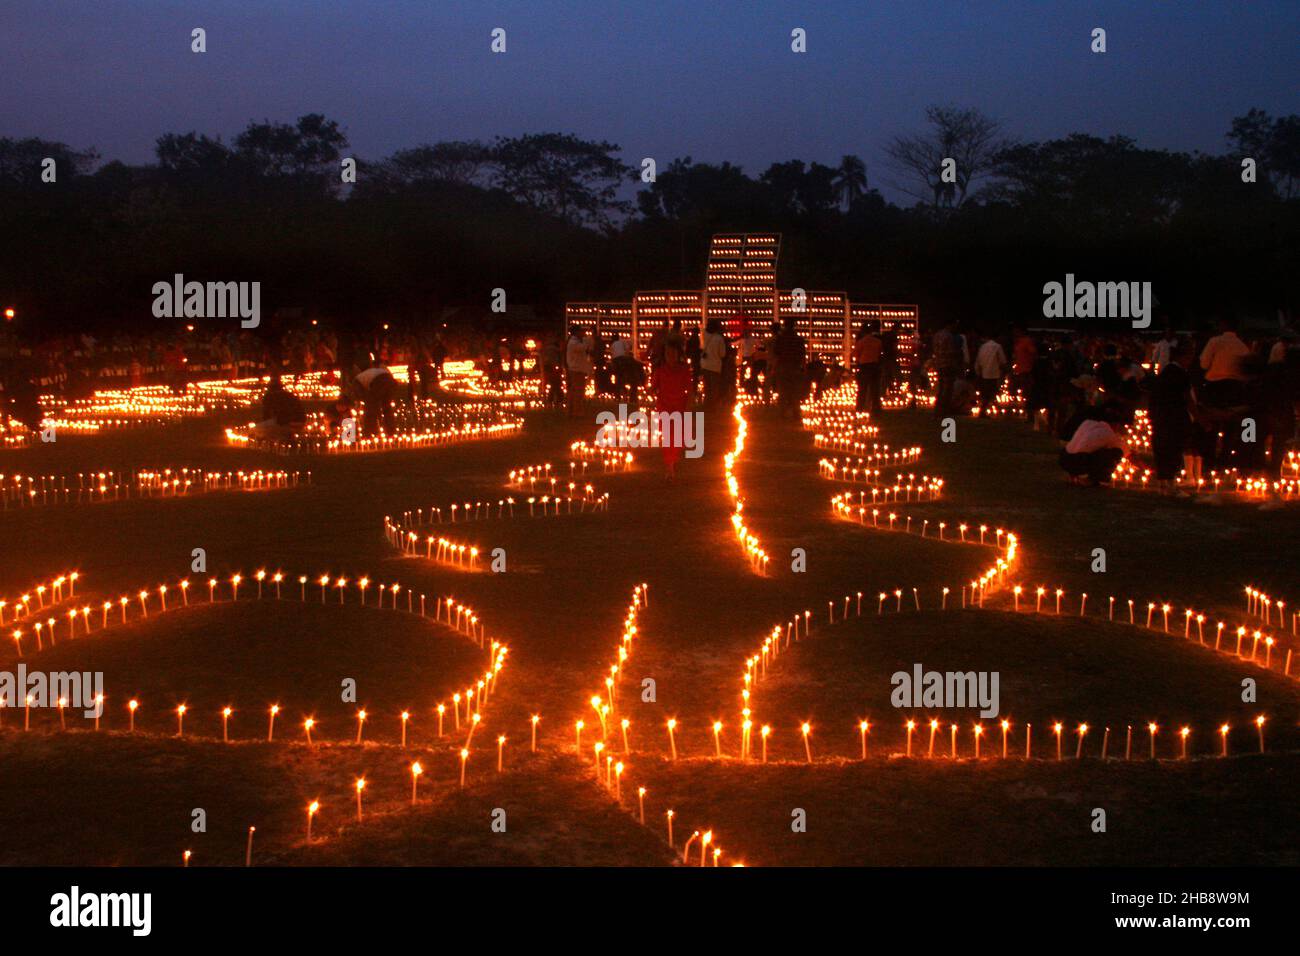 A grand function in remembrance of the martyrs of the language movement, Ekushey Udjapon Committee of Narail arranges one-lakh candles lighting in Nar Stock Photo